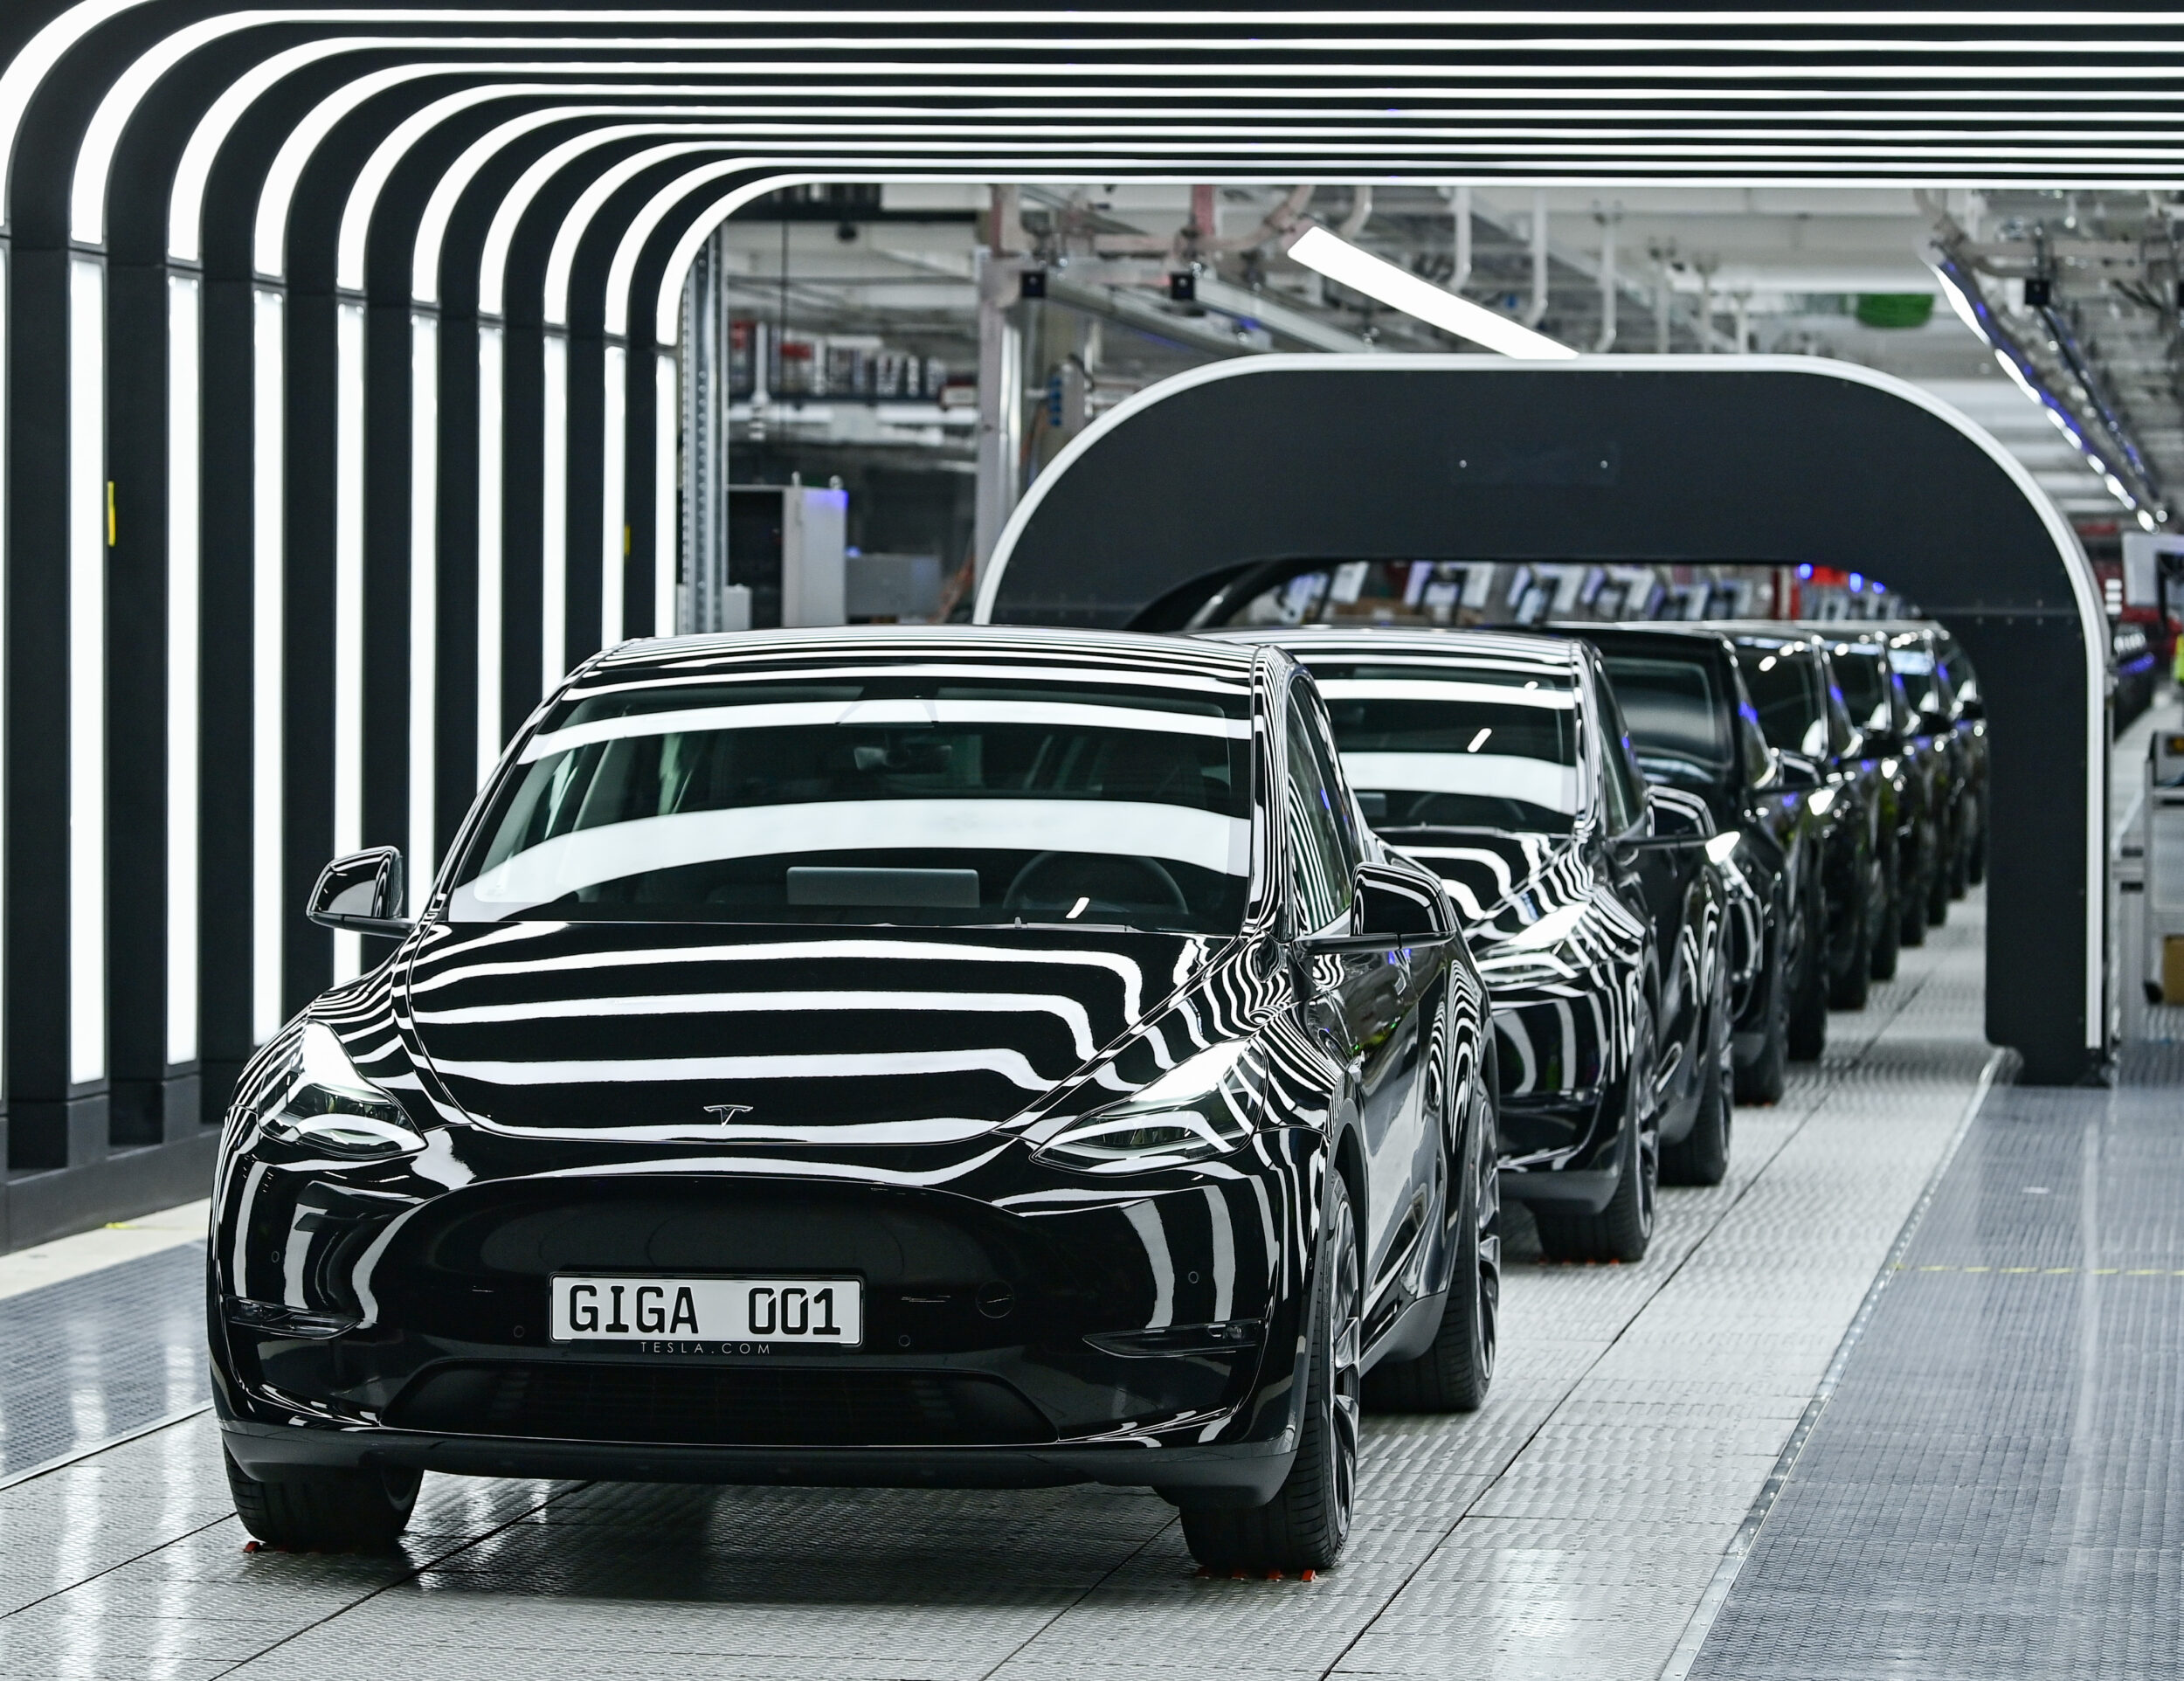 Several Model Y electric vehicles stand on a conveyor belt at the opening of the Tesla Gigafactory Berlin Brandenburg on March 22, 2022 in Brandenburg, Grünheide, Germany. The first European factory in Grünheide, which is designed for 500,000 vehicles per year, is an important pillar of Tesla's future strategy. | Patrick Pleul/picture alliance via Getty Images